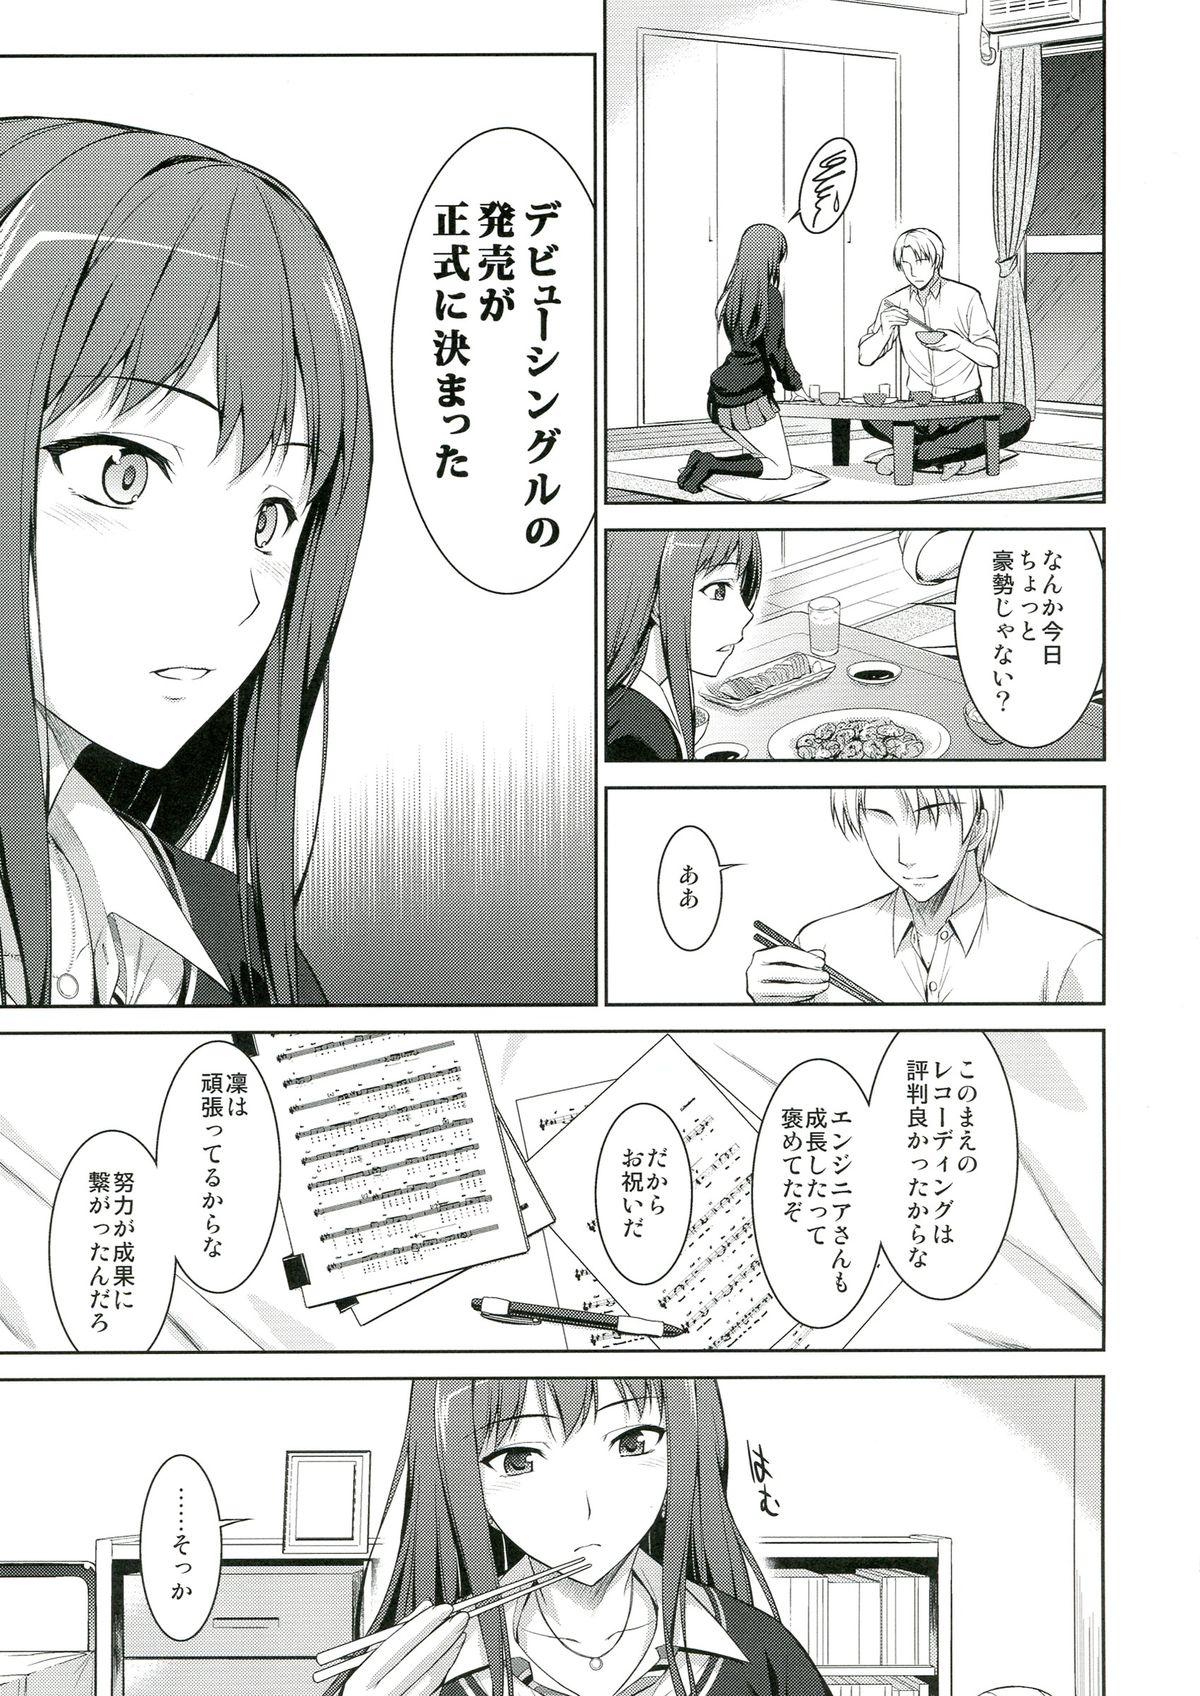 Reversecowgirl Ore to Shiburin to One Room - The idolmaster Sexteen - Page 5